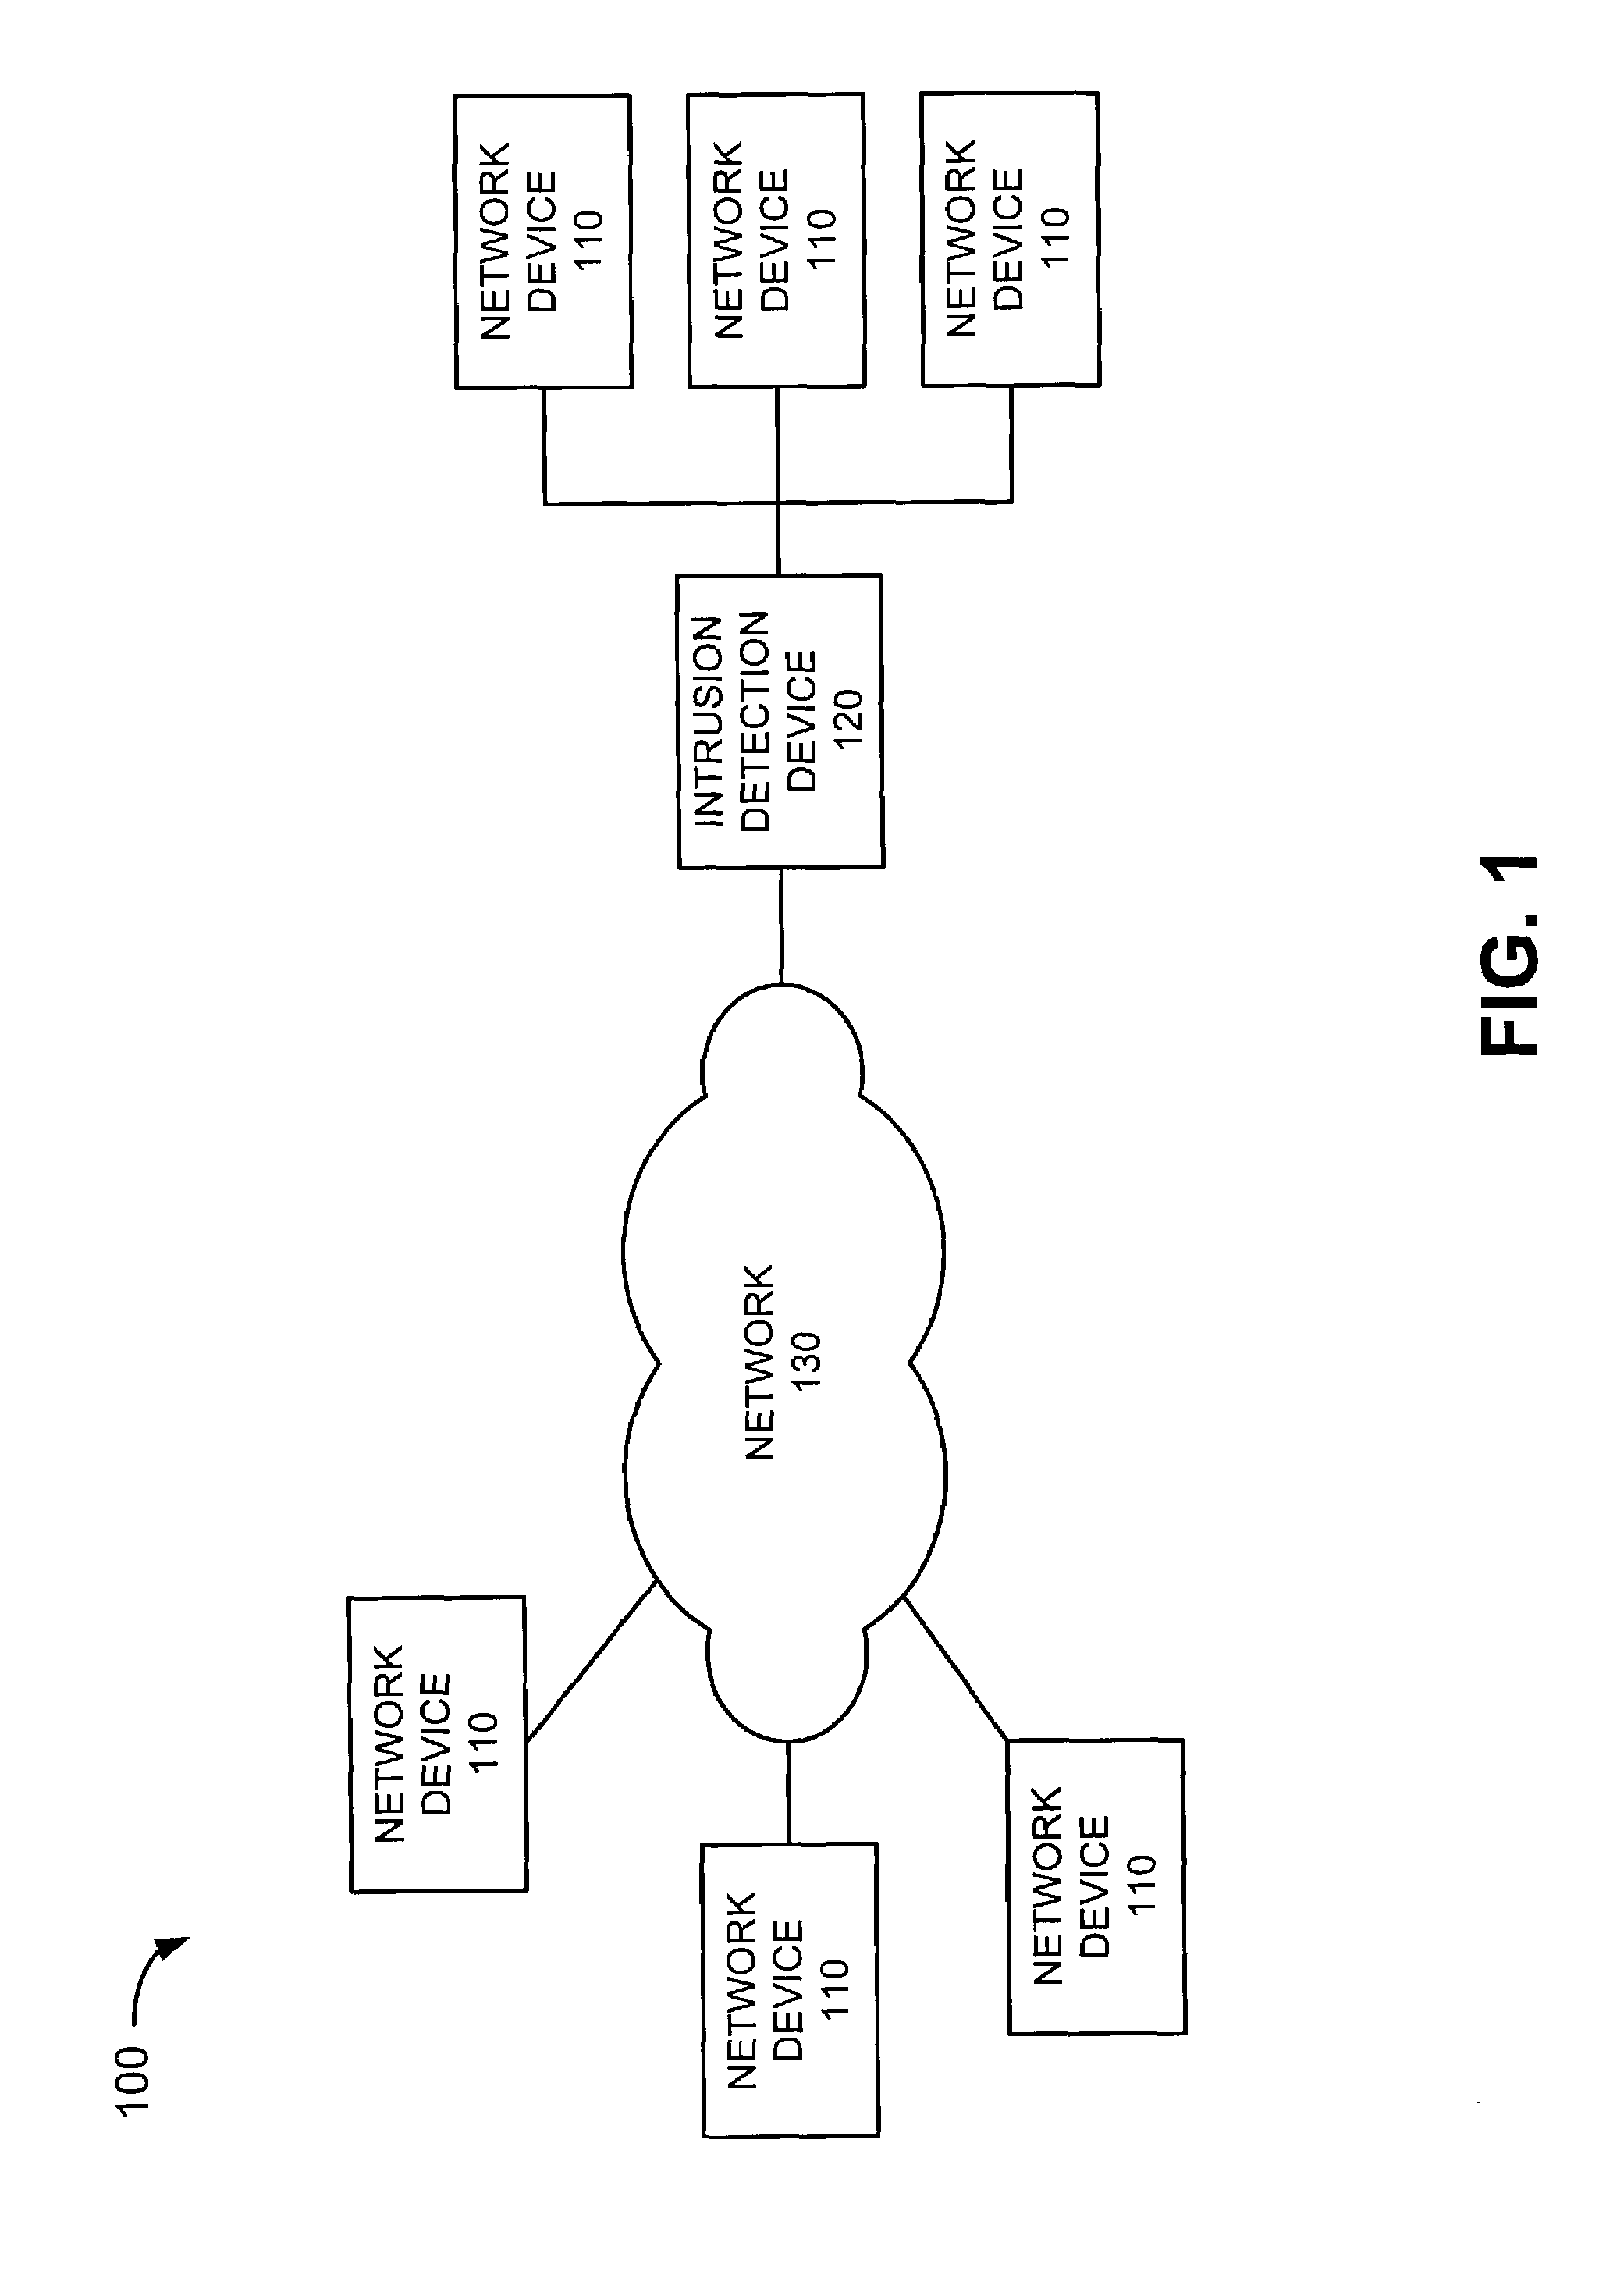 Systems and methods for detecting network intrusions